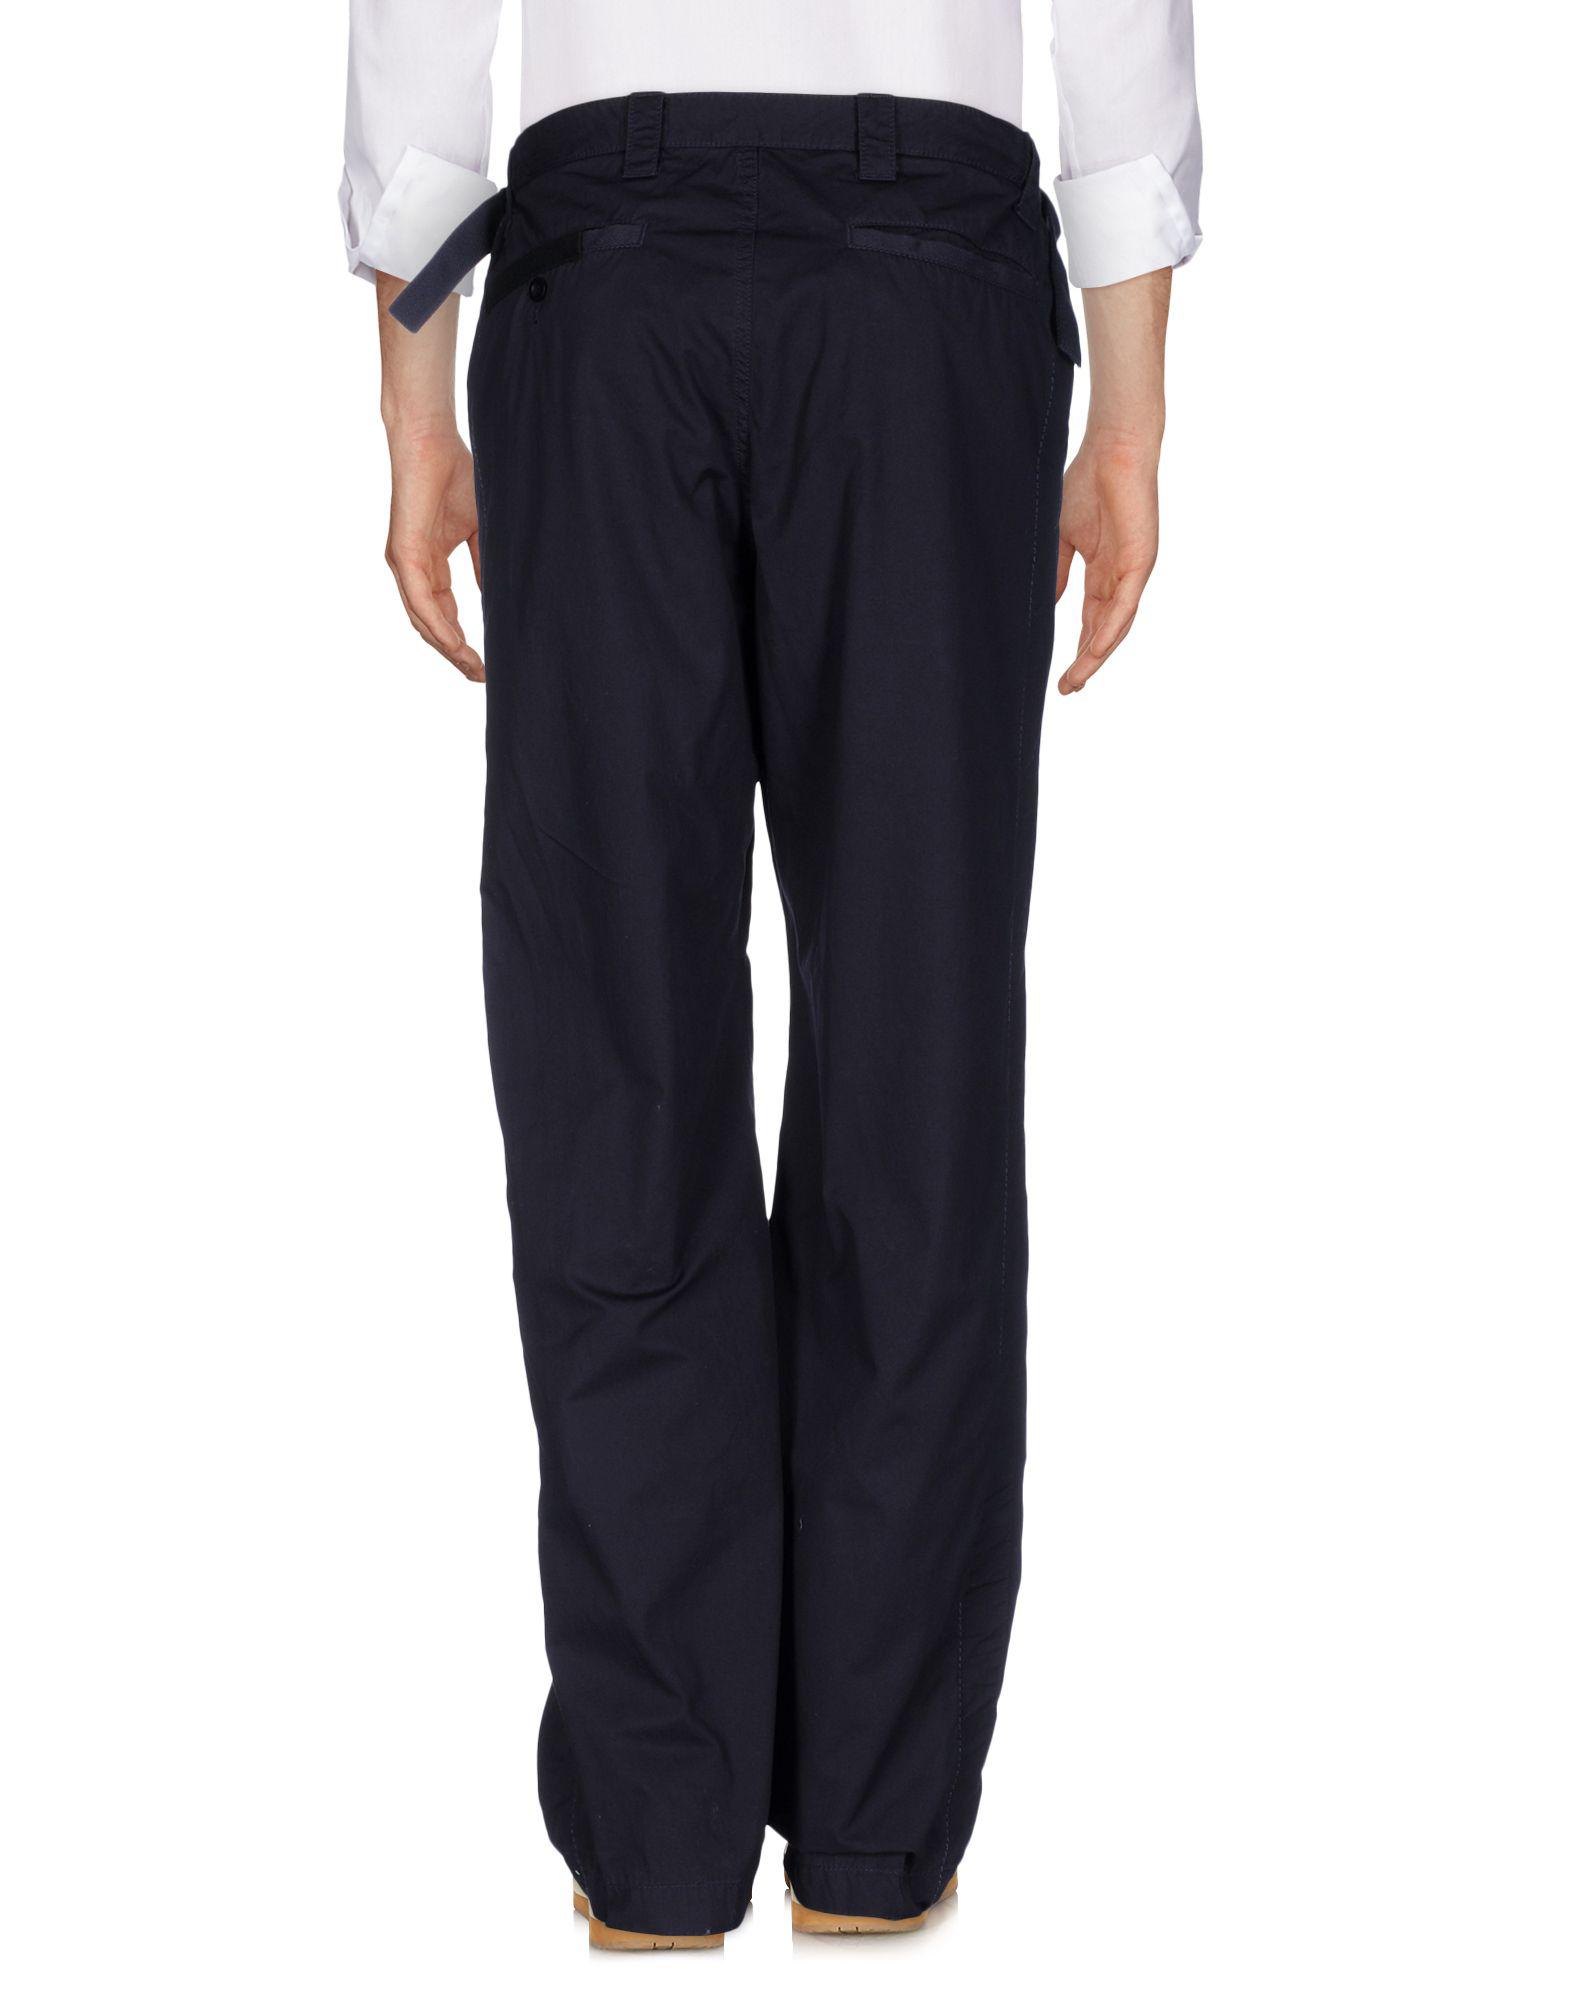 Sacai Cotton Casual Pants in Dark Blue (Blue) for Men - Lyst